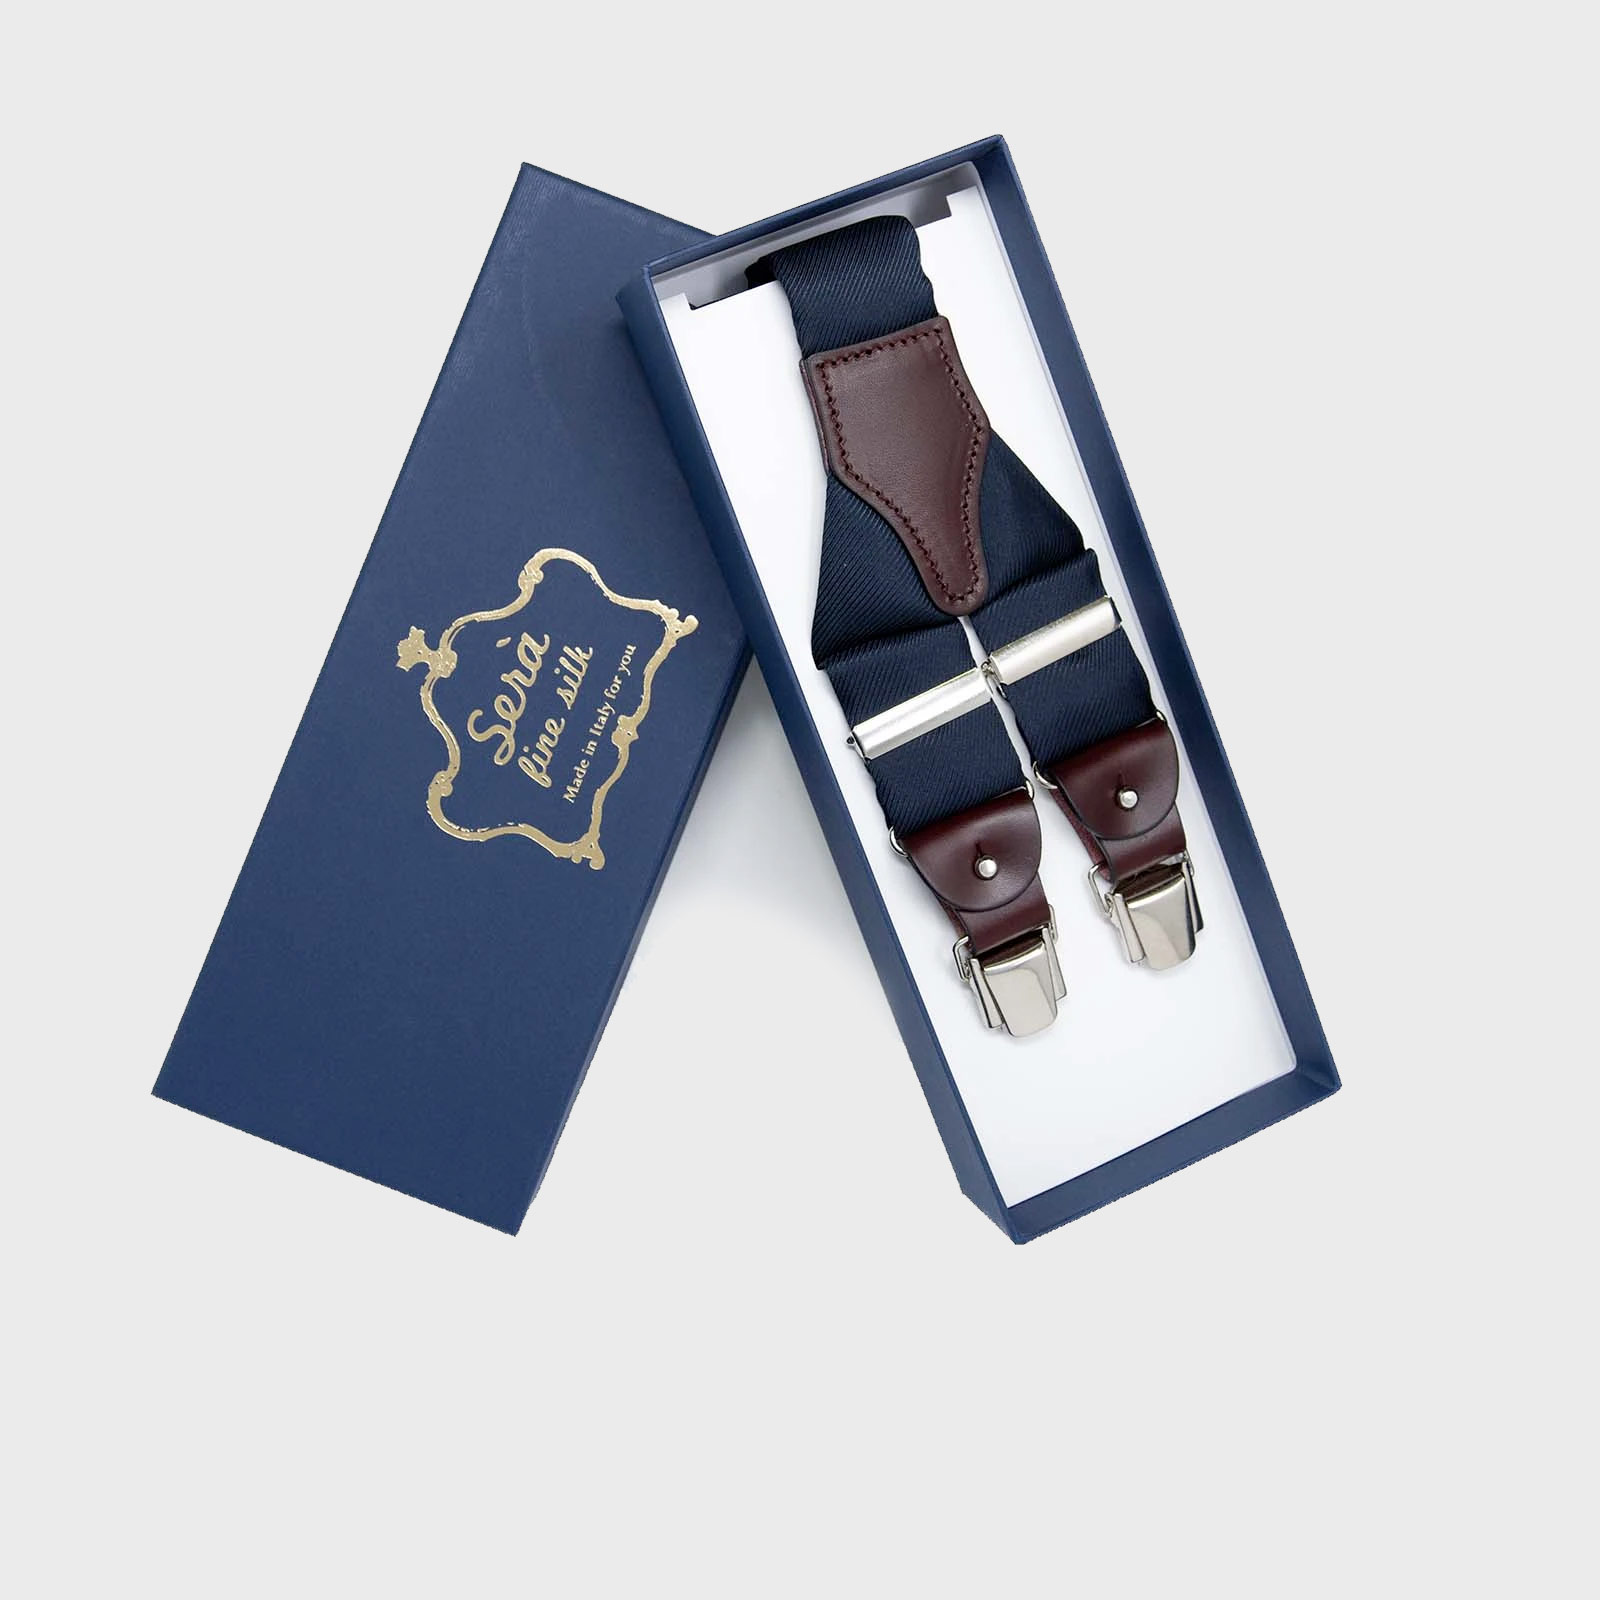 Navy Blue and Burgundy leather Silk Suspenders